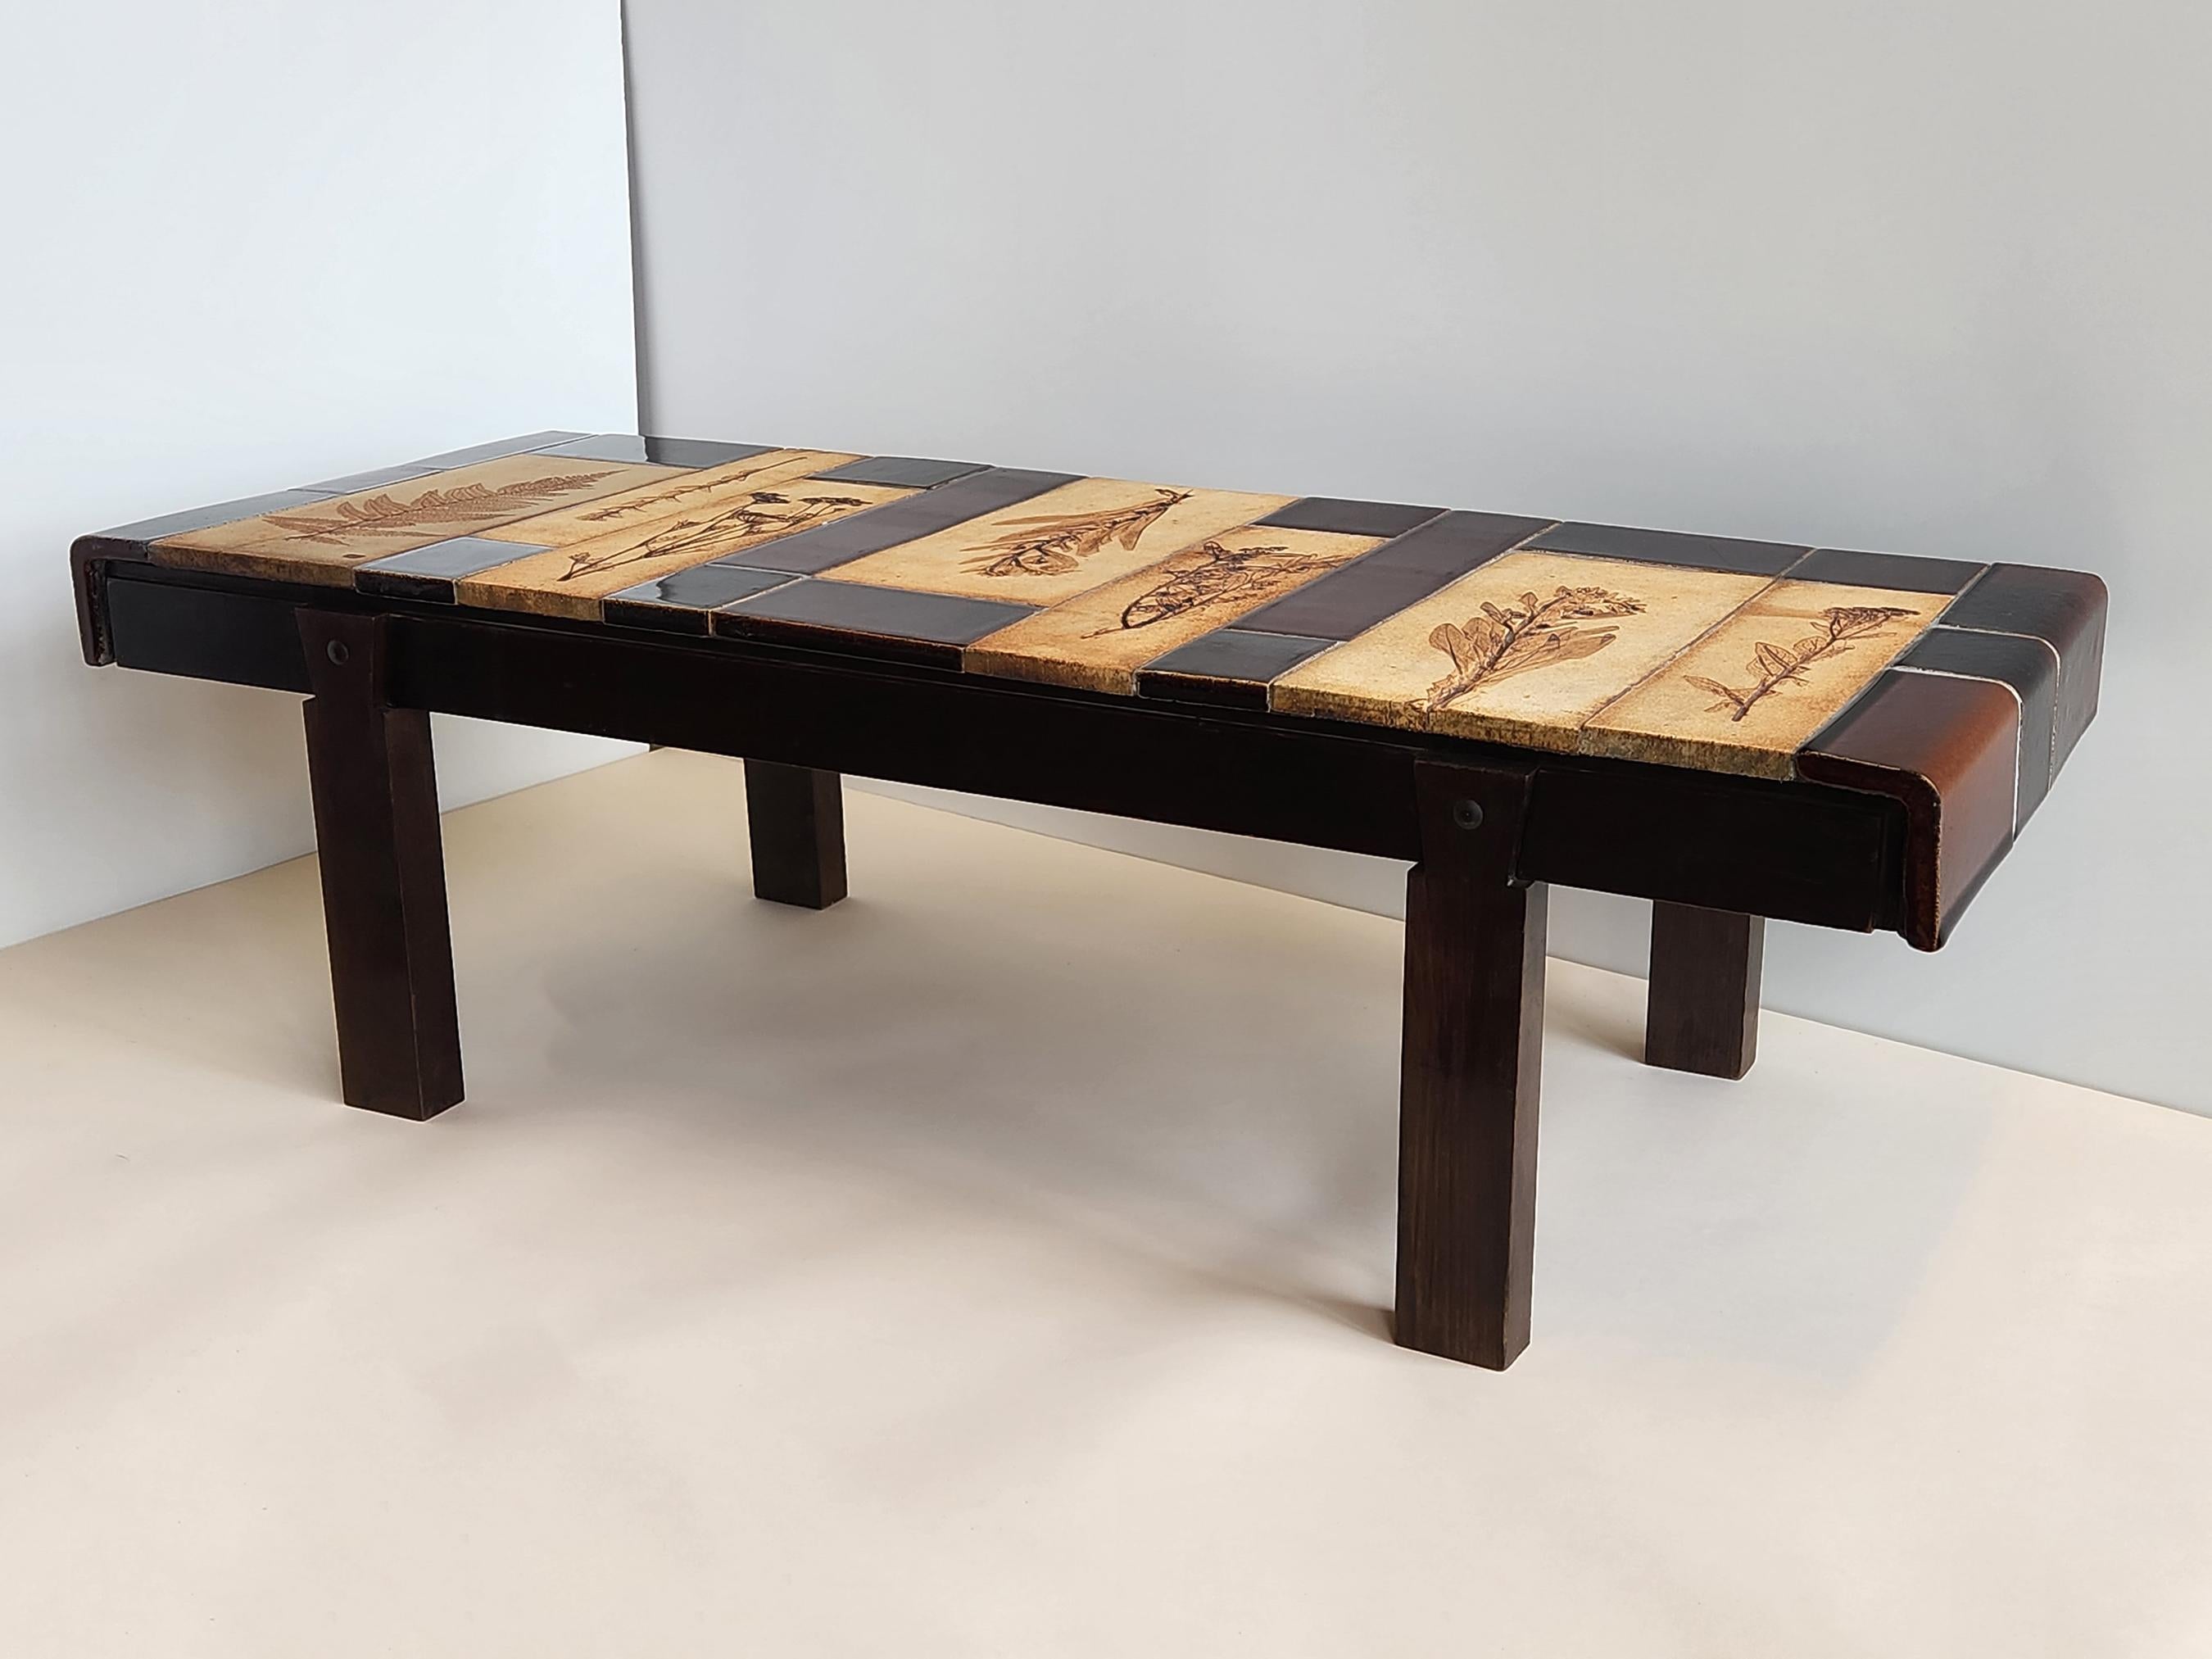 French Roger Capron - Coffee Table with Terra Cotta Garrigue and Brown Tiles, 1970s For Sale